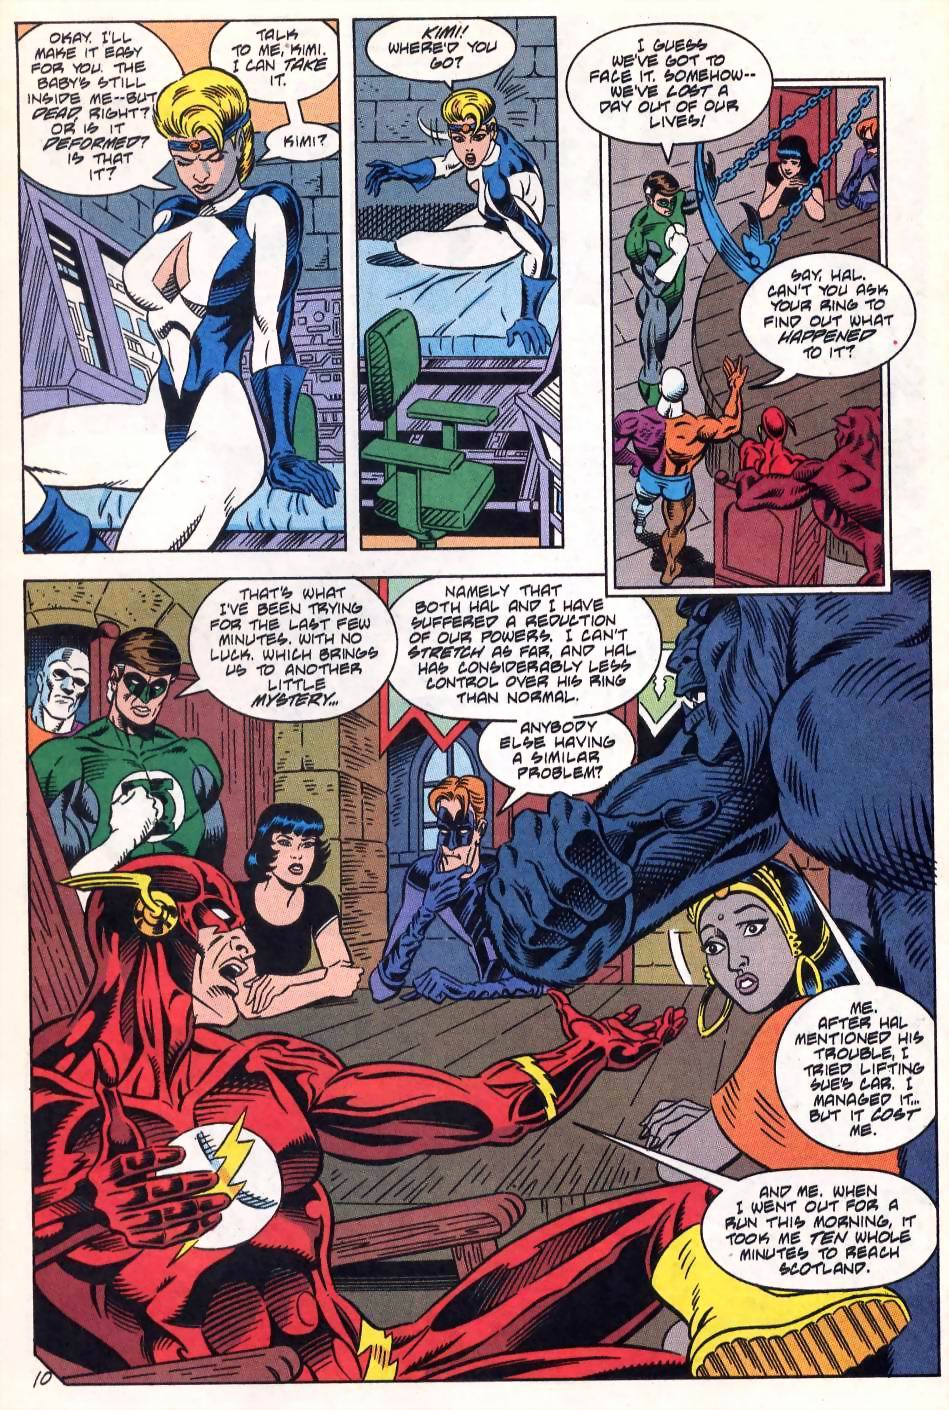 Justice League International (1993) 54 Page 10